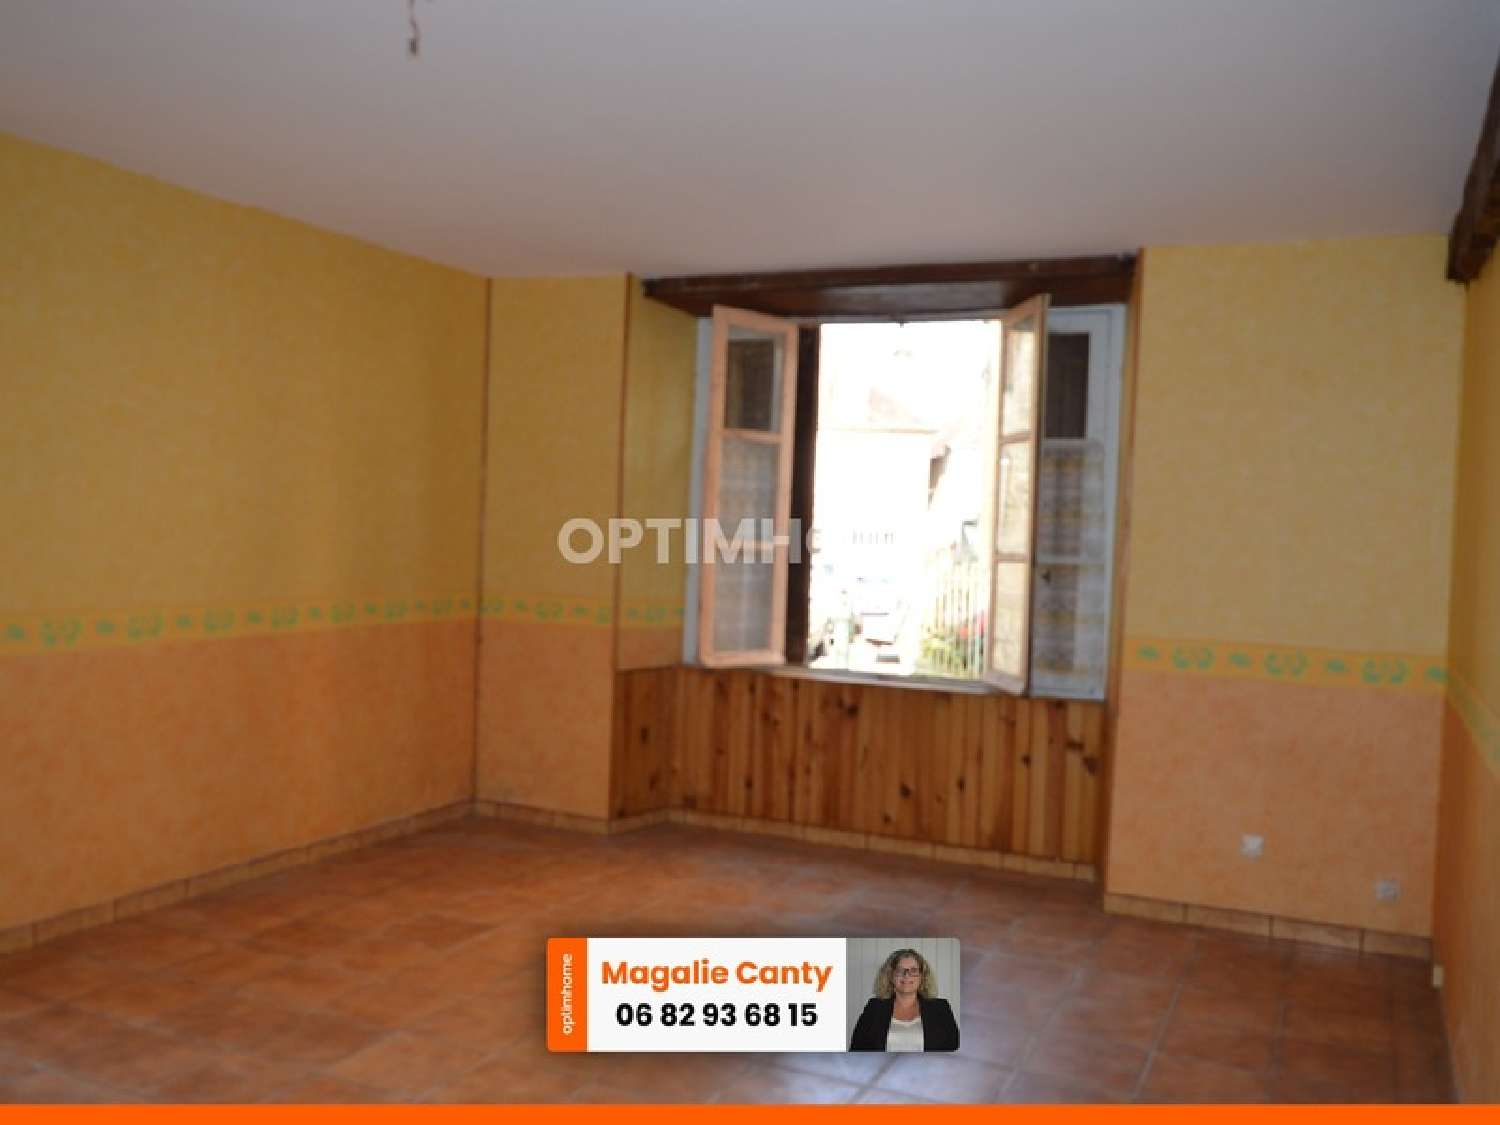  for sale house Excideuil Dordogne 3